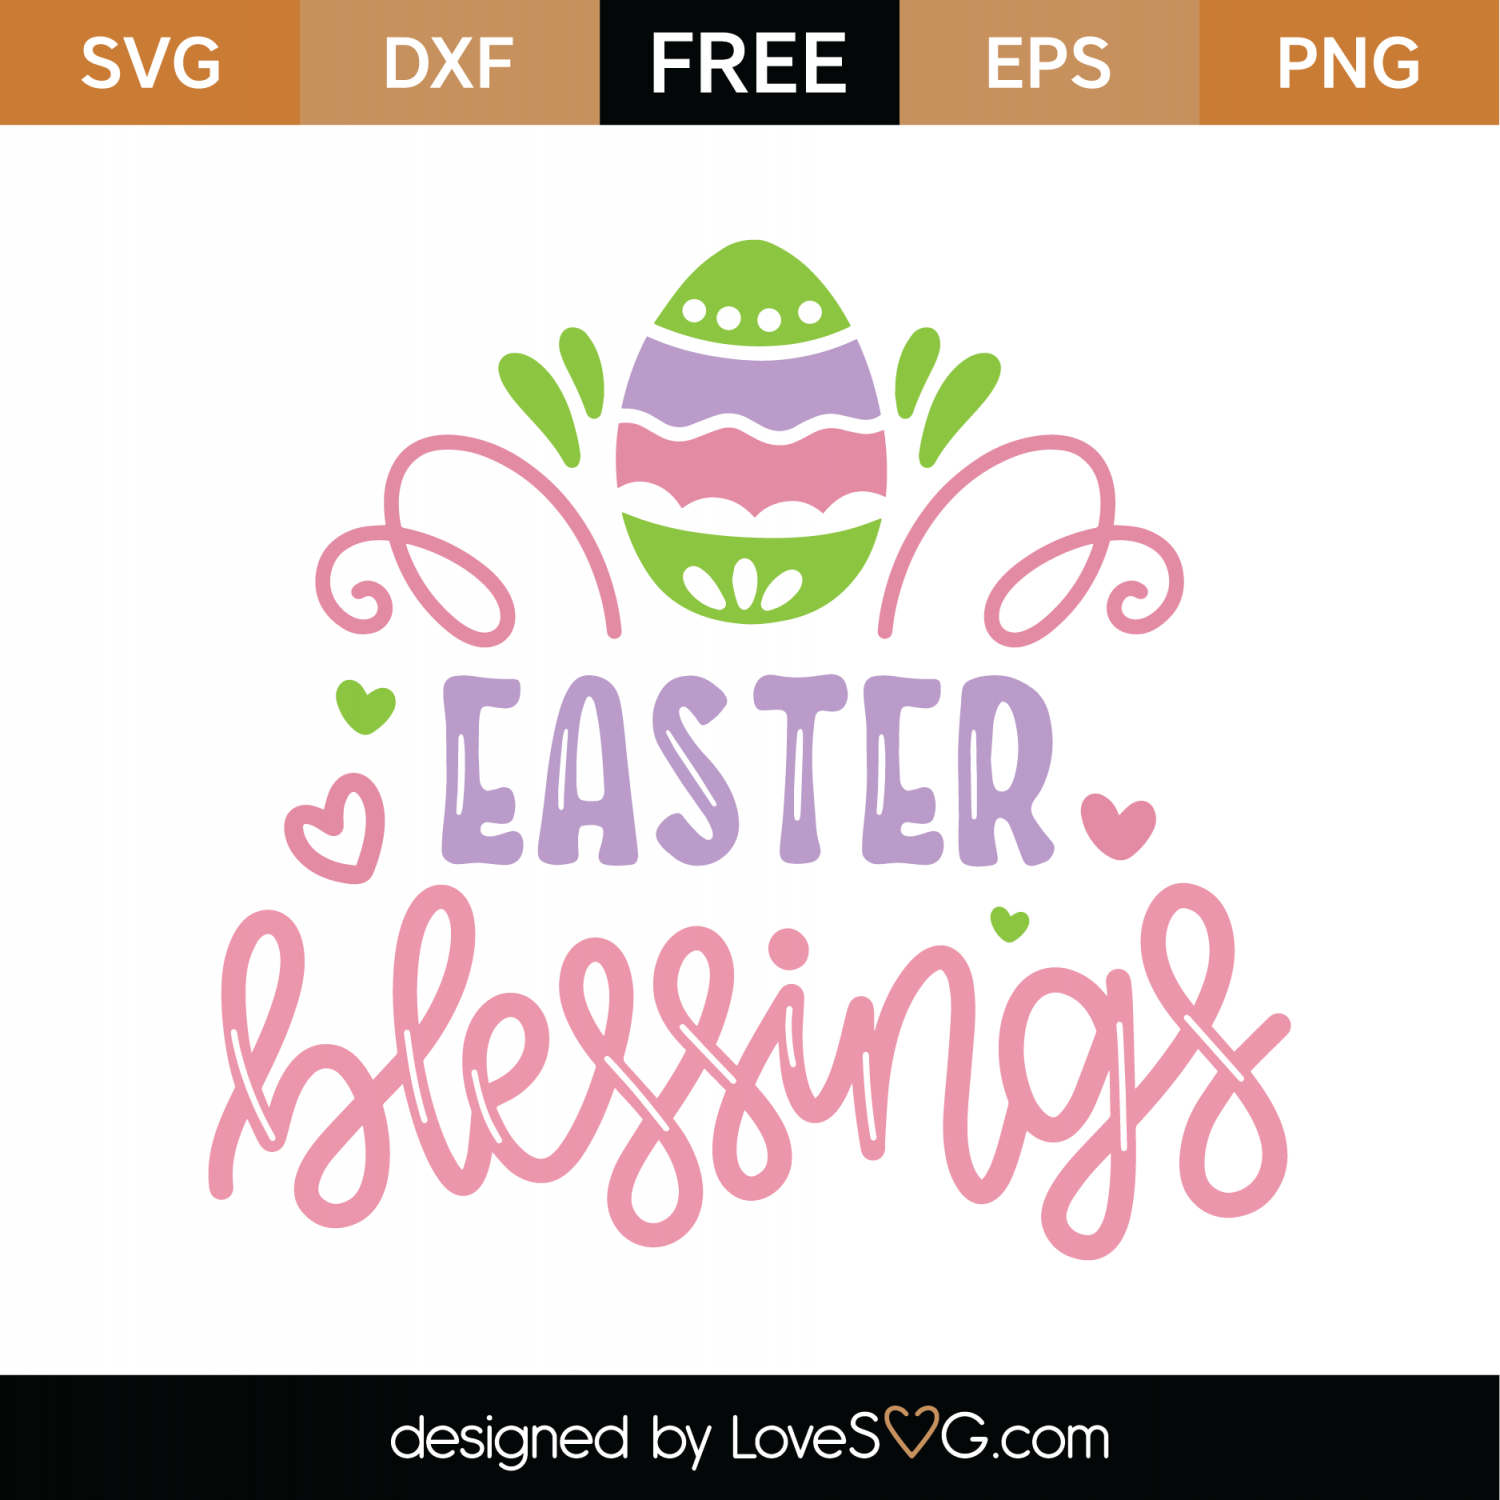 Easter Blessings SVG Cut File 8745 1500x1500 2